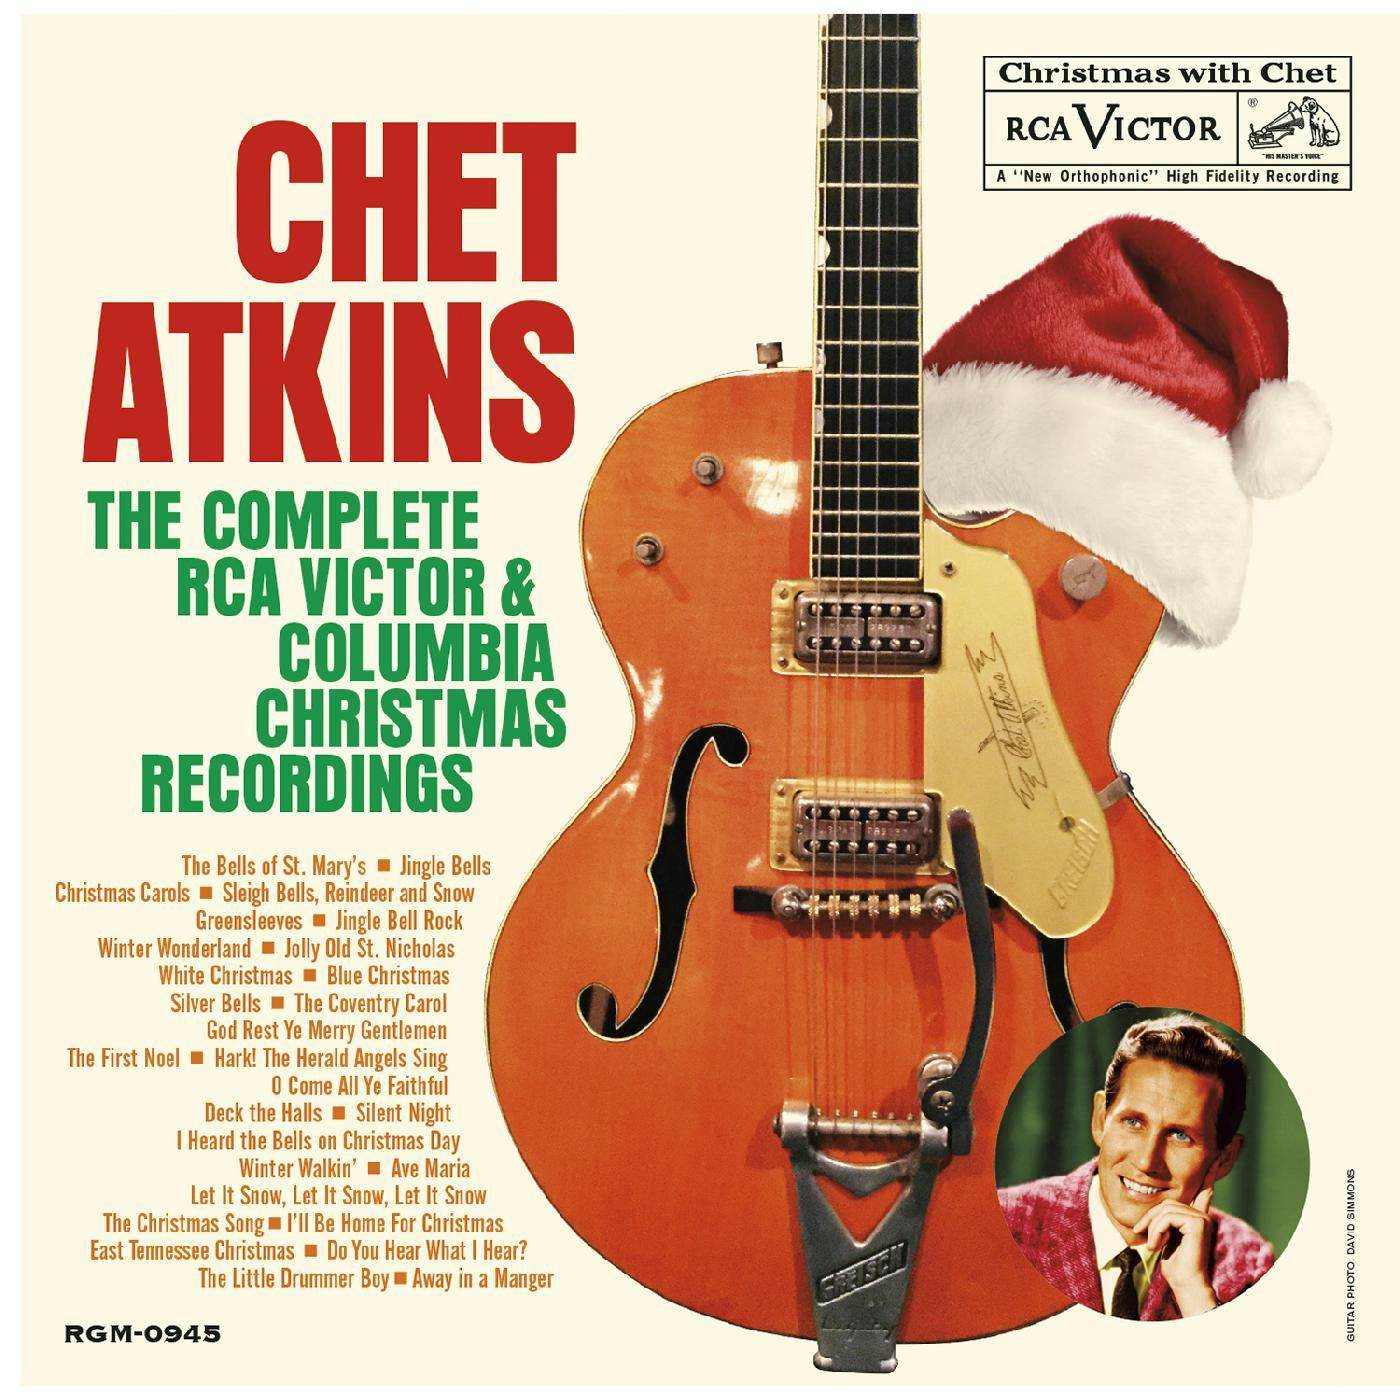 Chet Atkins COMPLETE RCA VICTOR & COLUMBIA CHRISTMA RECORDINGS CD